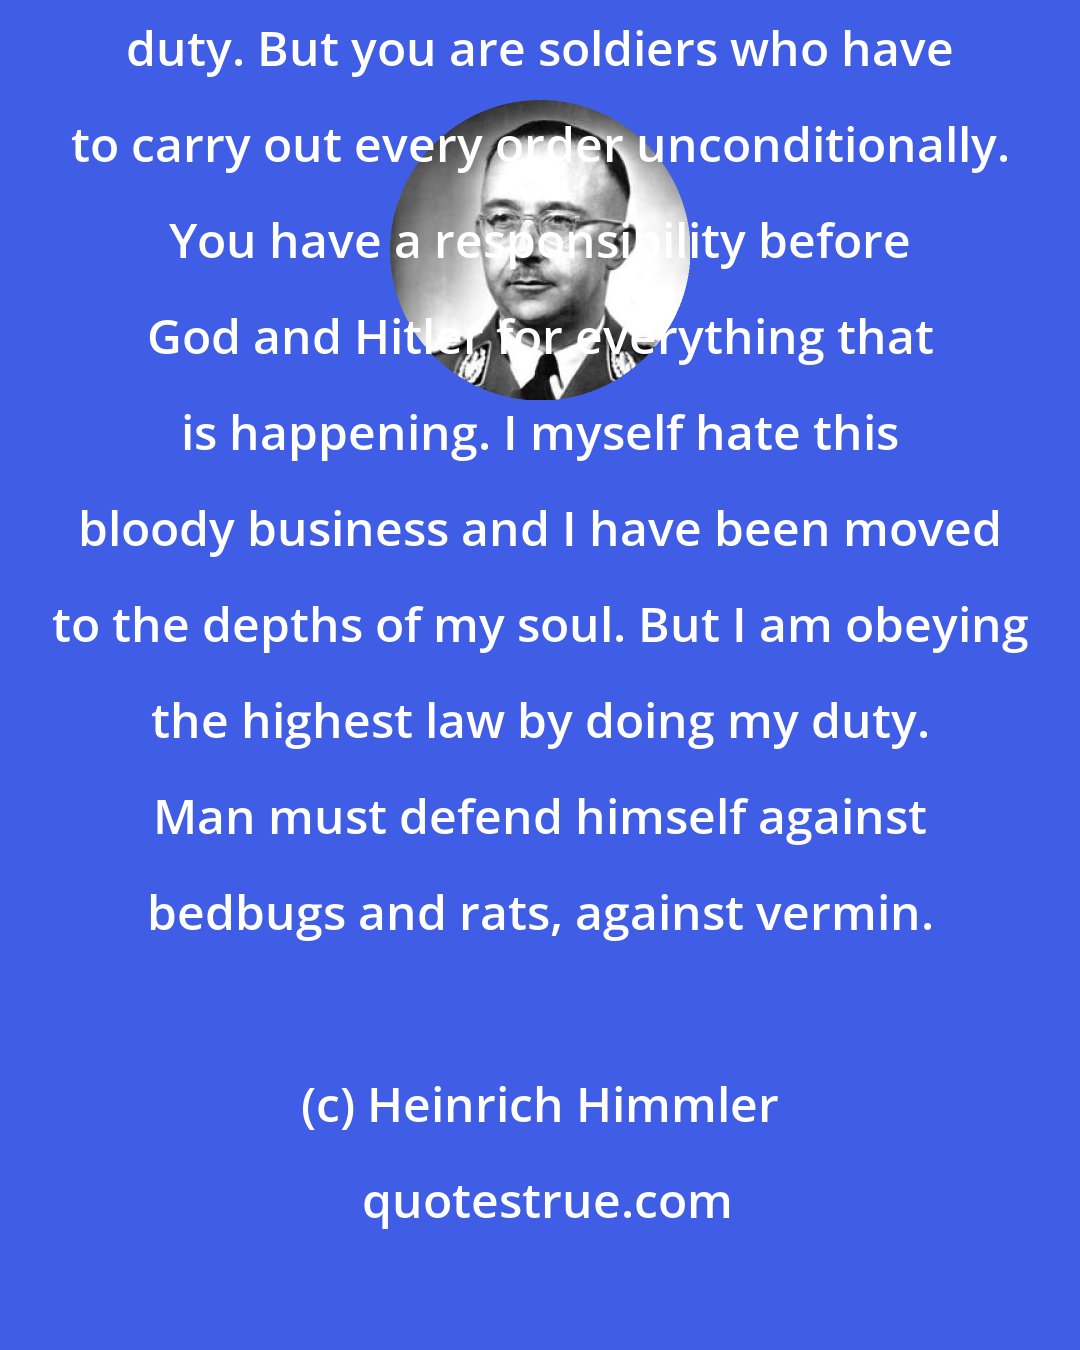 Heinrich Himmler: You men of the einsatzgruppen are called upon to fulfill a repulsive duty. But you are soldiers who have to carry out every order unconditionally. You have a responsibility before God and Hitler for everything that is happening. I myself hate this bloody business and I have been moved to the depths of my soul. But I am obeying the highest law by doing my duty. Man must defend himself against bedbugs and rats, against vermin.